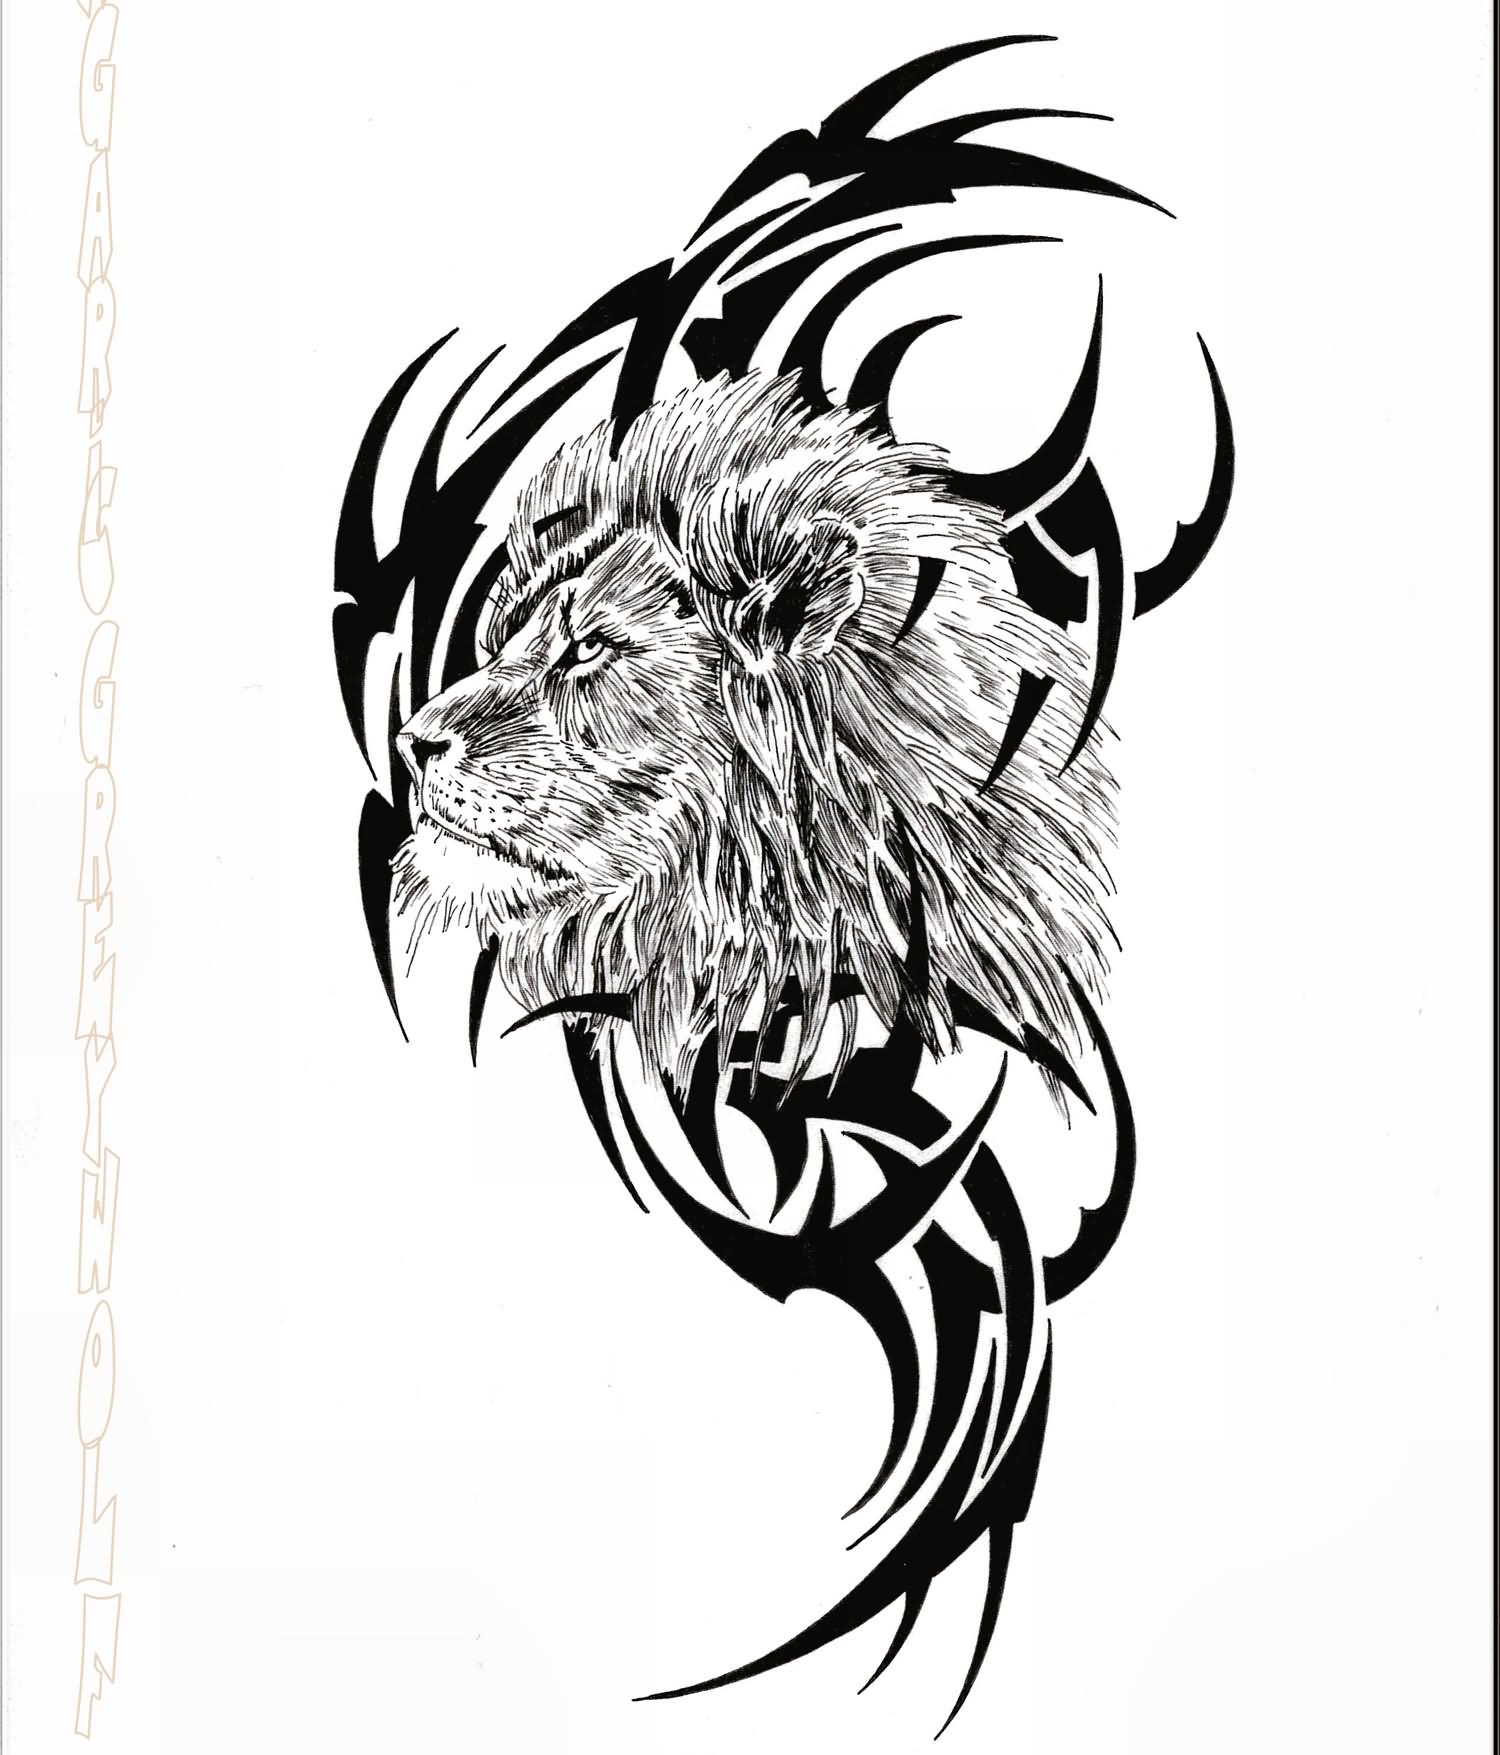 Realistic lion with tribal pattern tattoo design by Agaricgreywolf